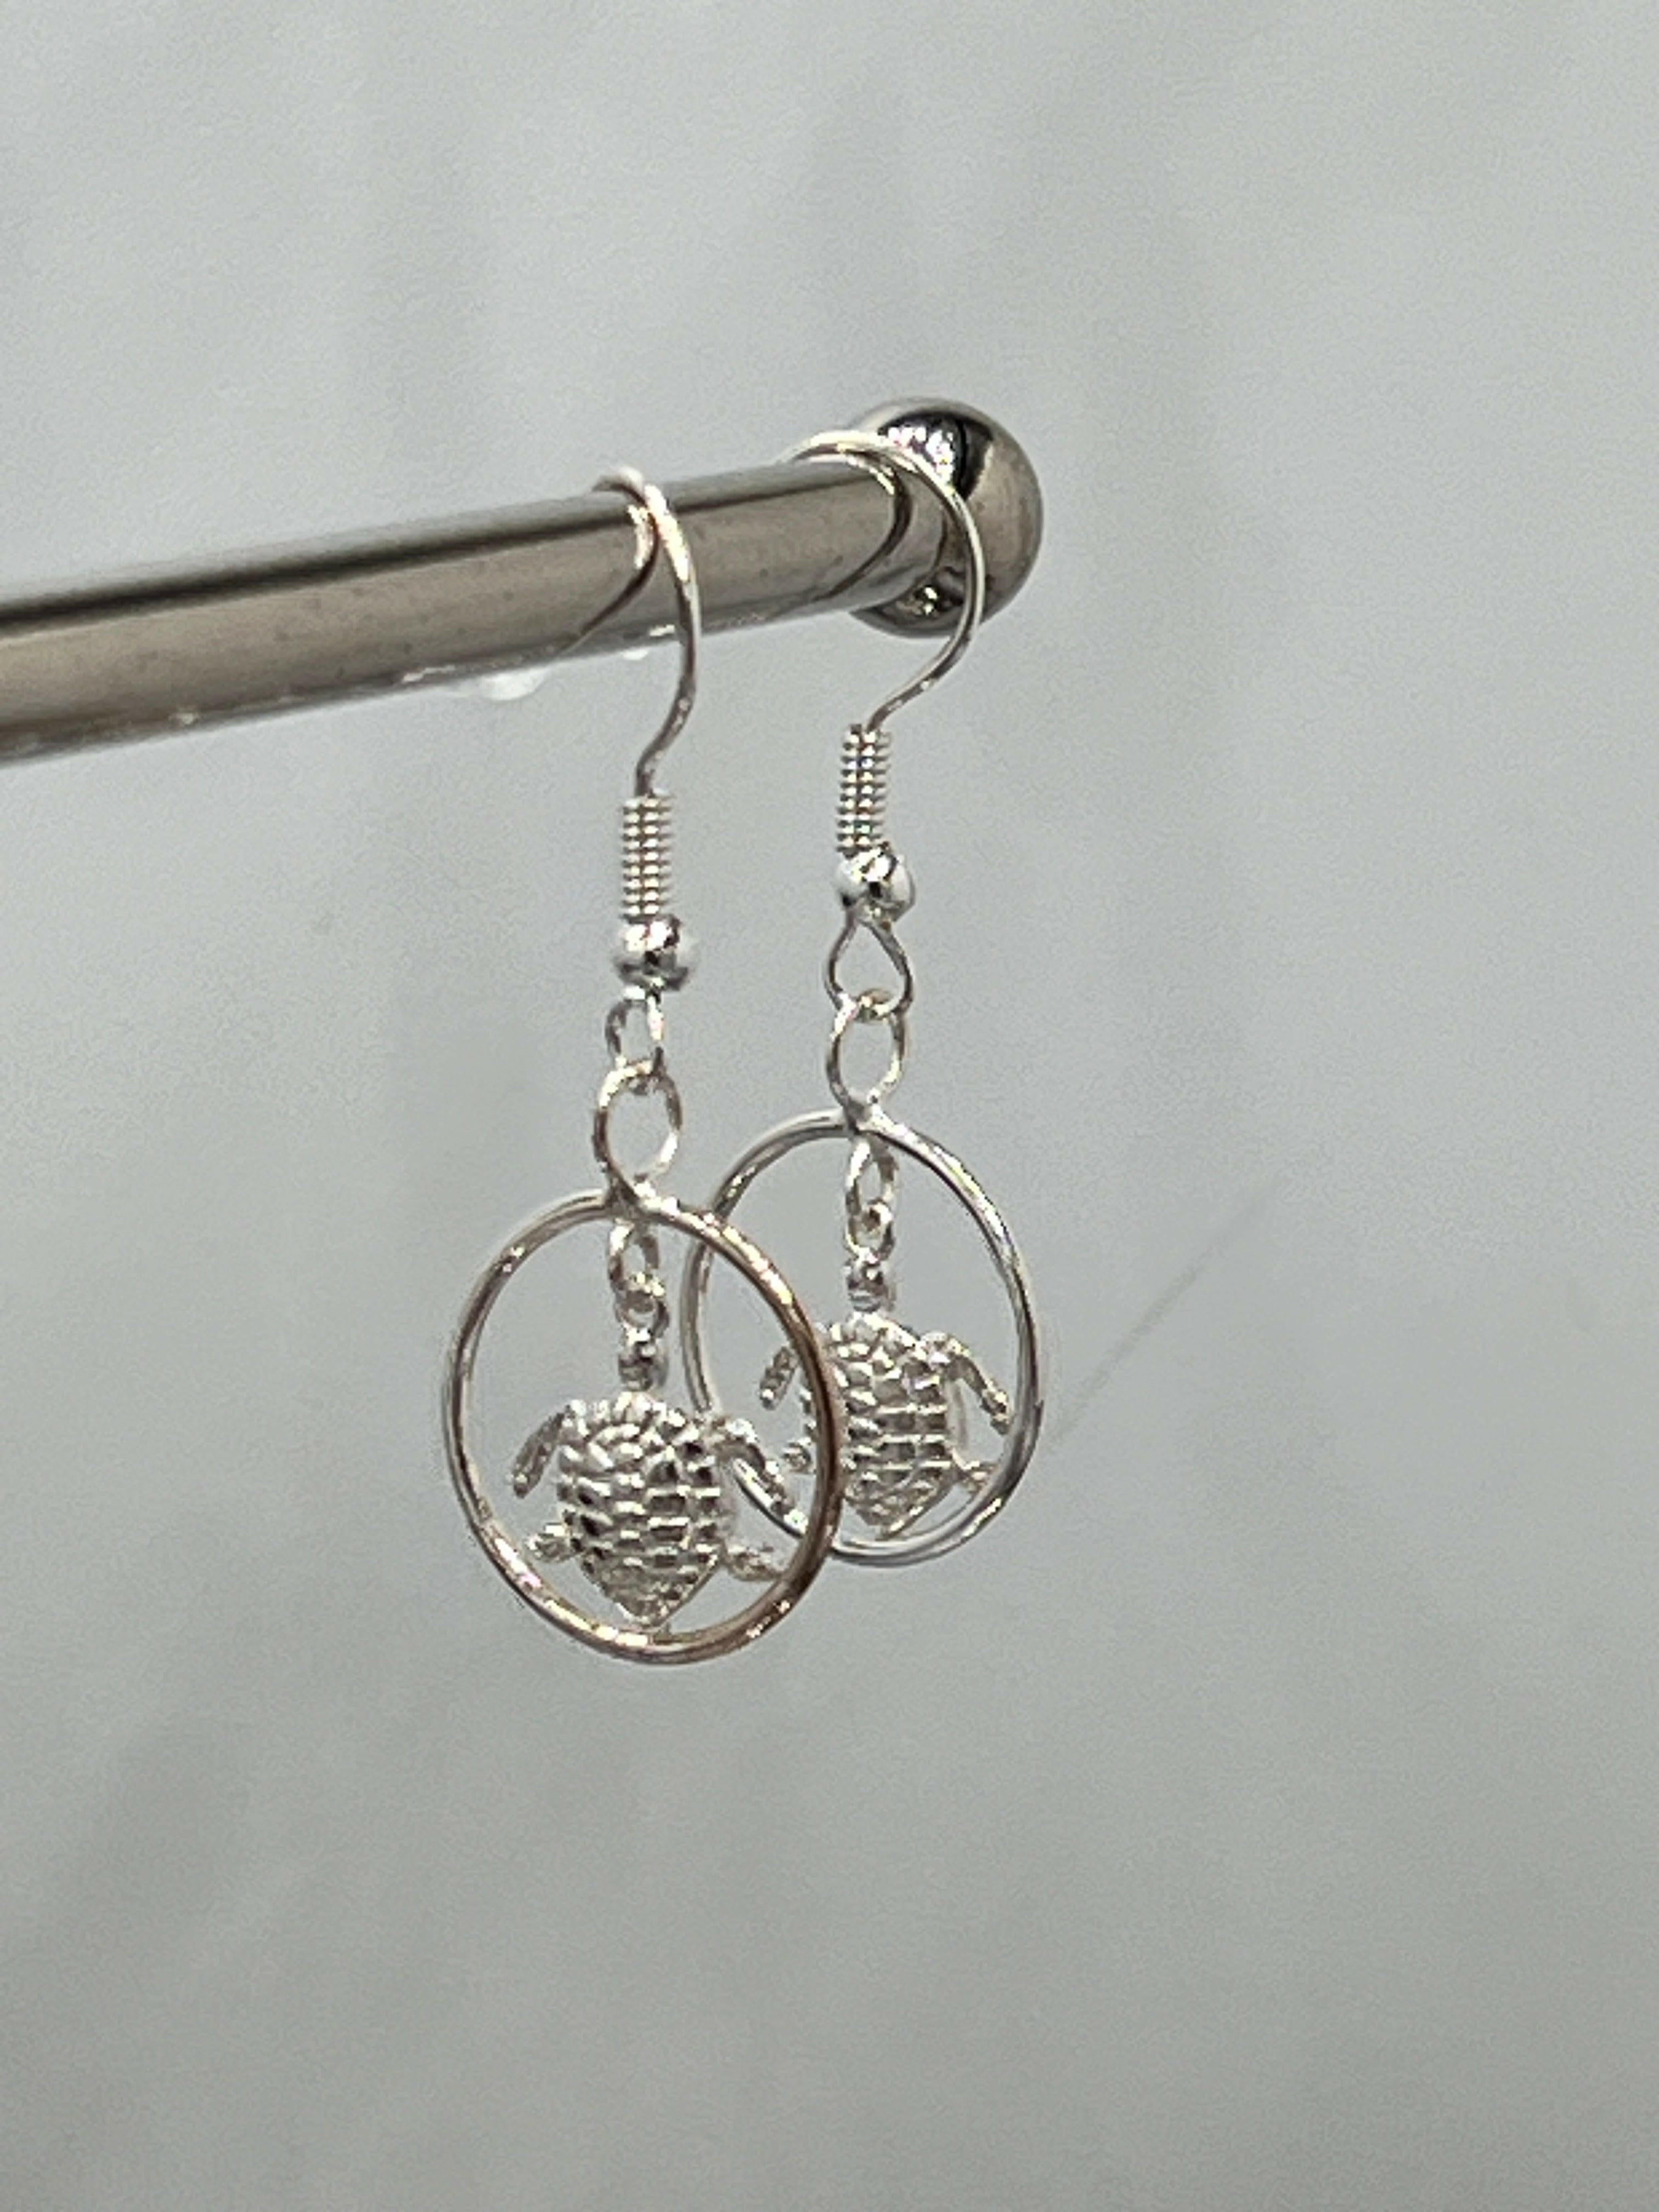 Bec Sue Jewelry Shop Jewelry sterling silver / all sterling silver turtle and wire Sterling Silver Sea Turtle Earrings, Turtle Earrings Tags 723